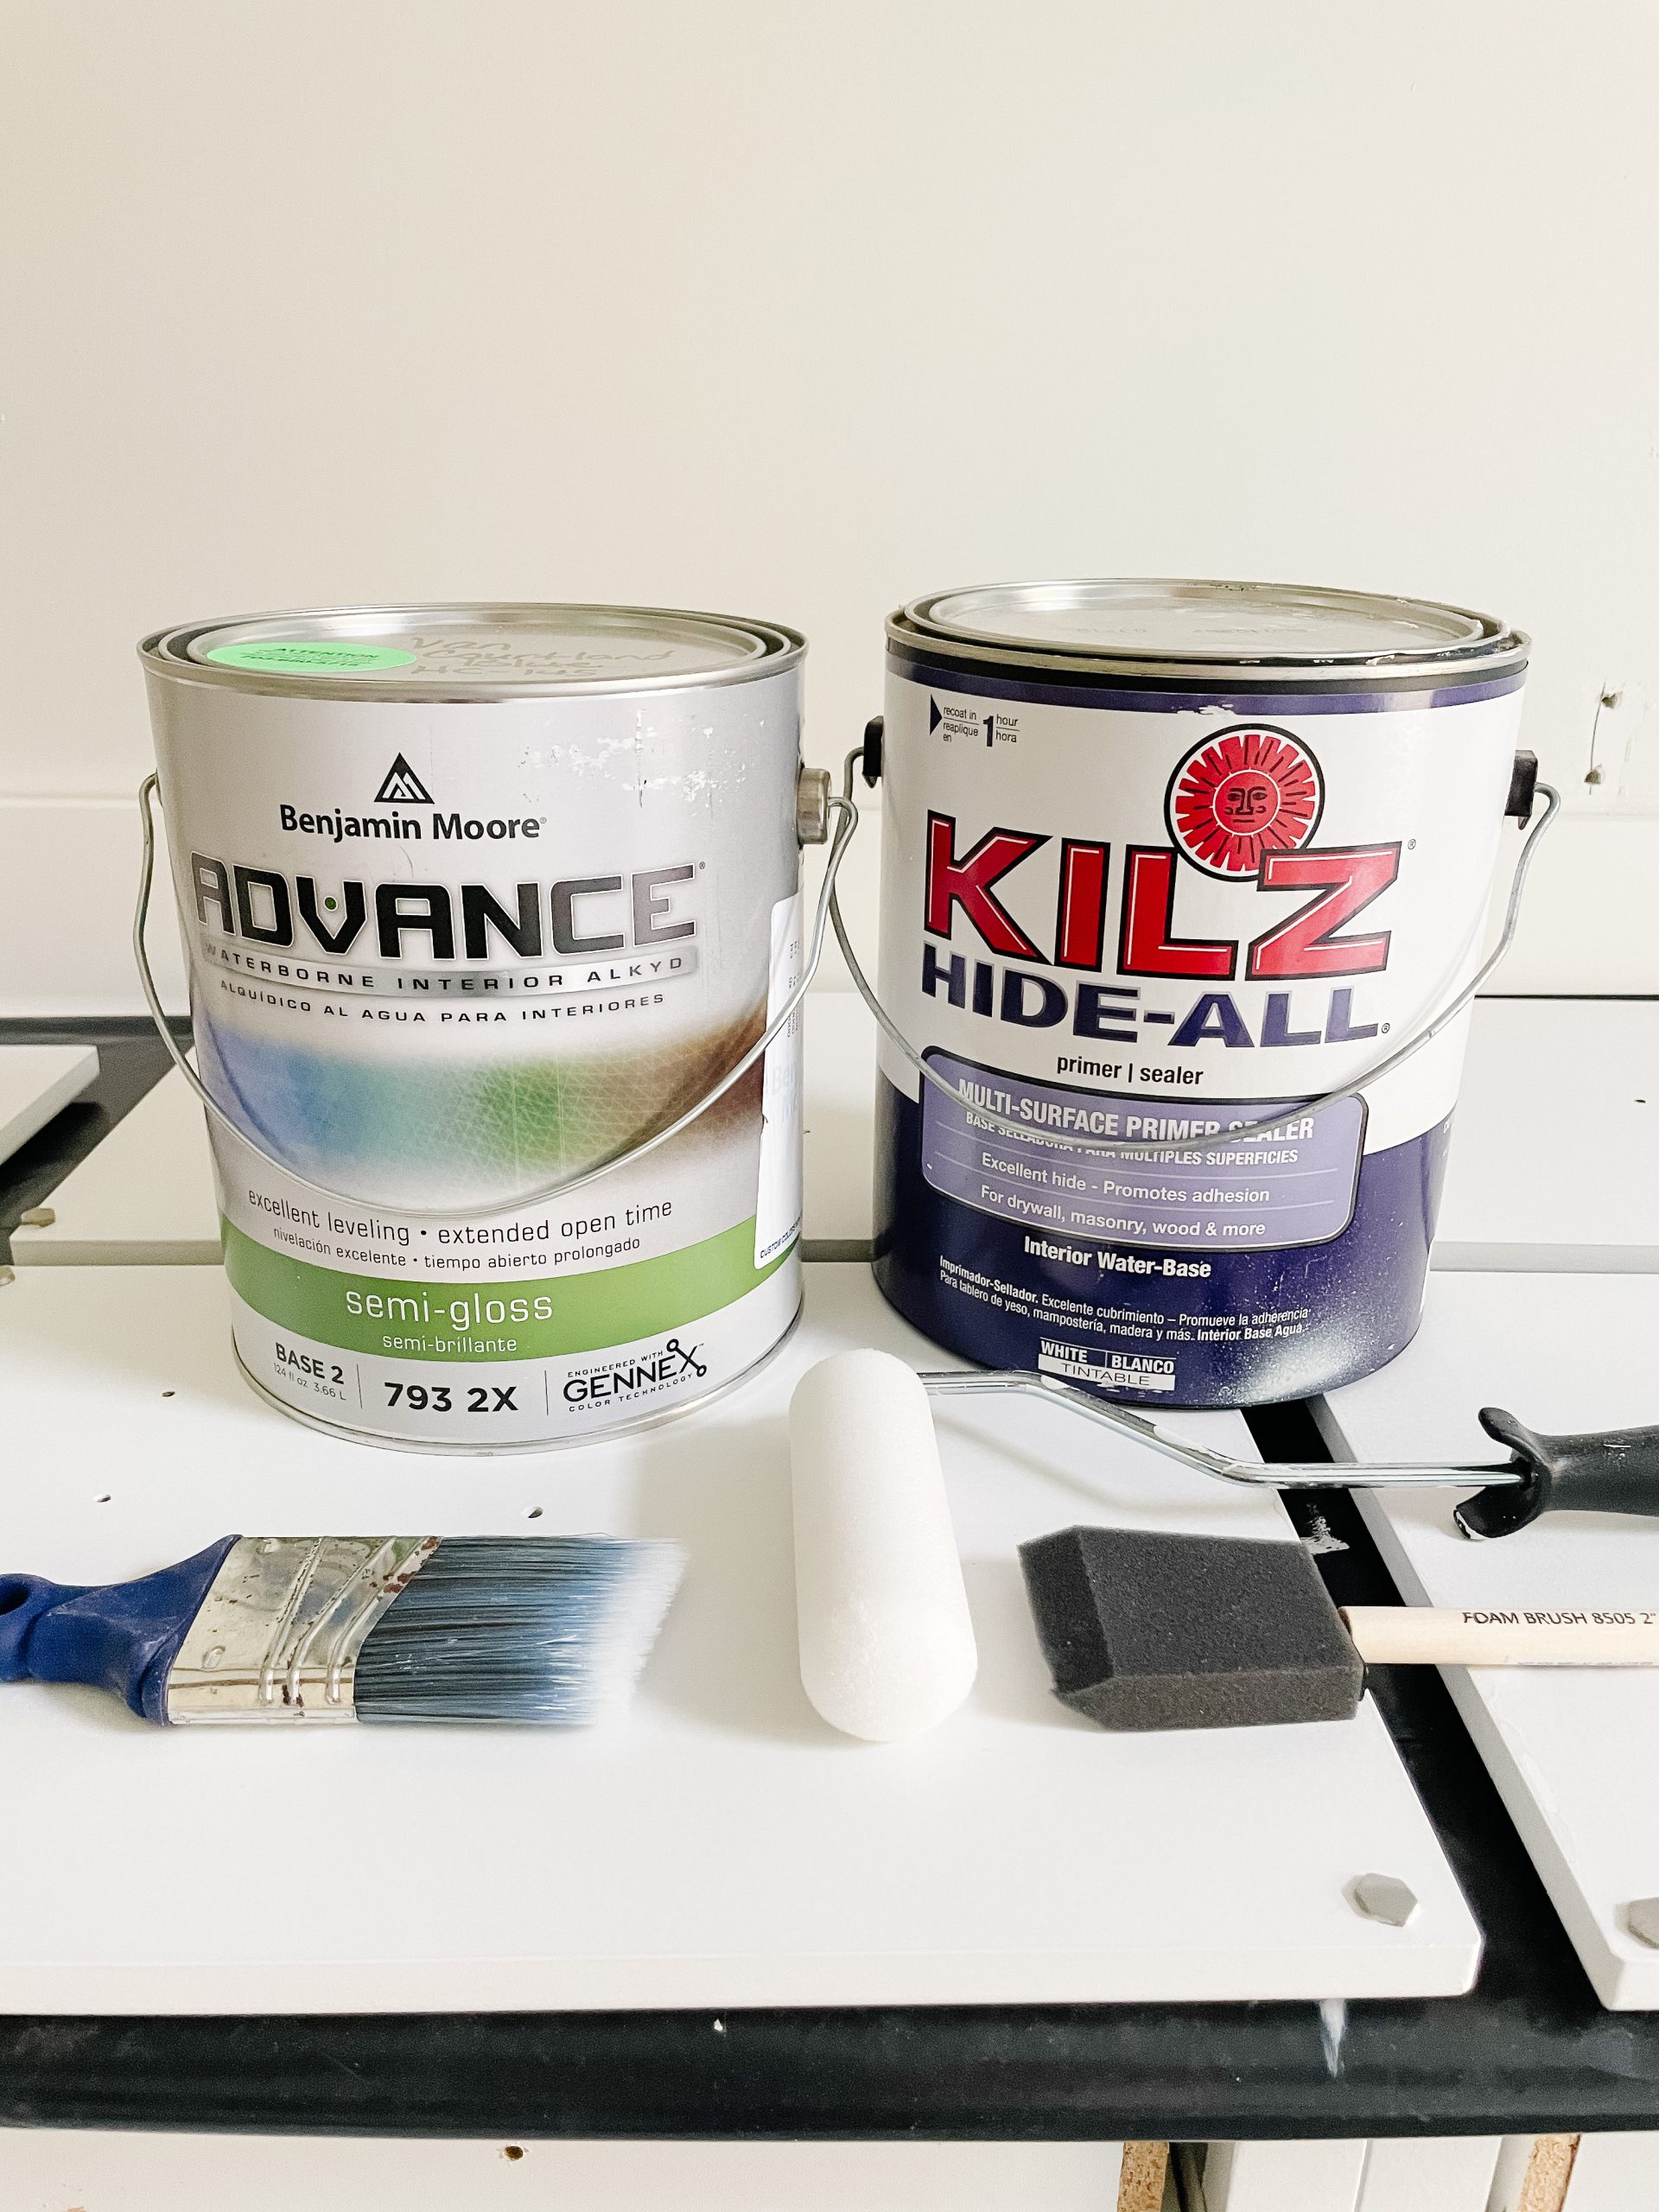 Cans of paint and tools needed to paint thermofoil cabinets